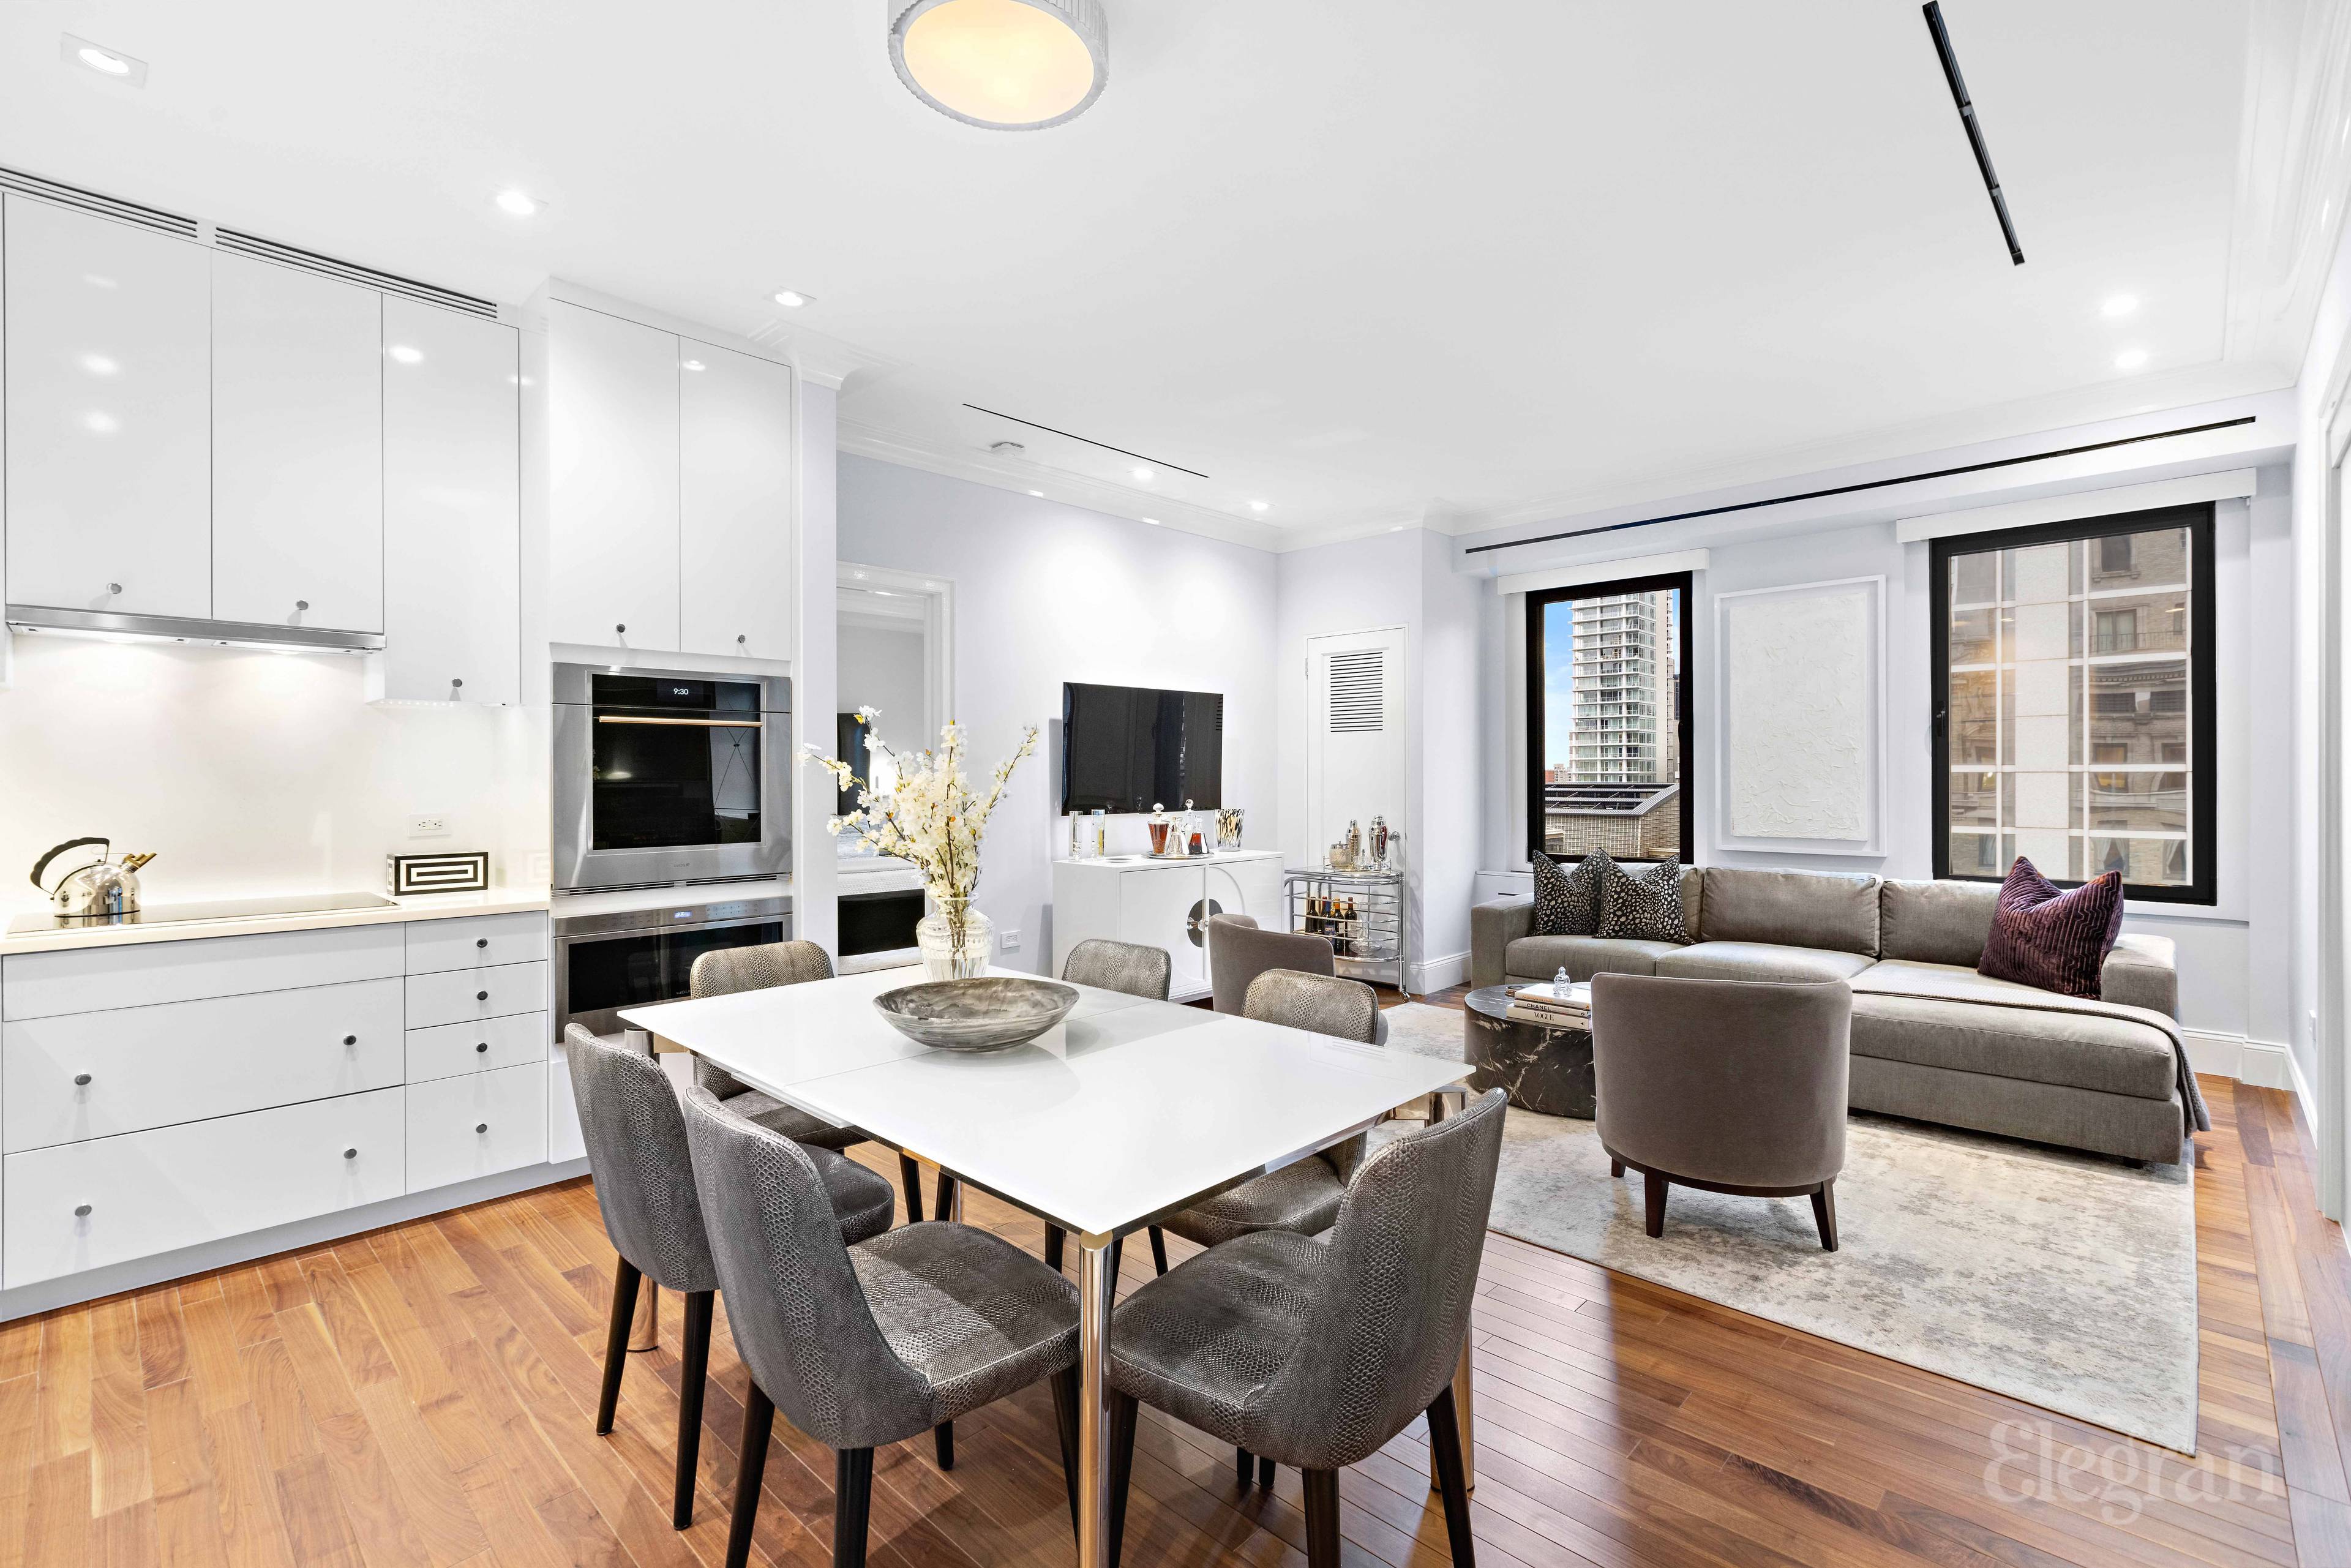 Experience luxurious living at The Ritz Tower, a meticulously renovated two bedroom residence in the heart of Manhattan.